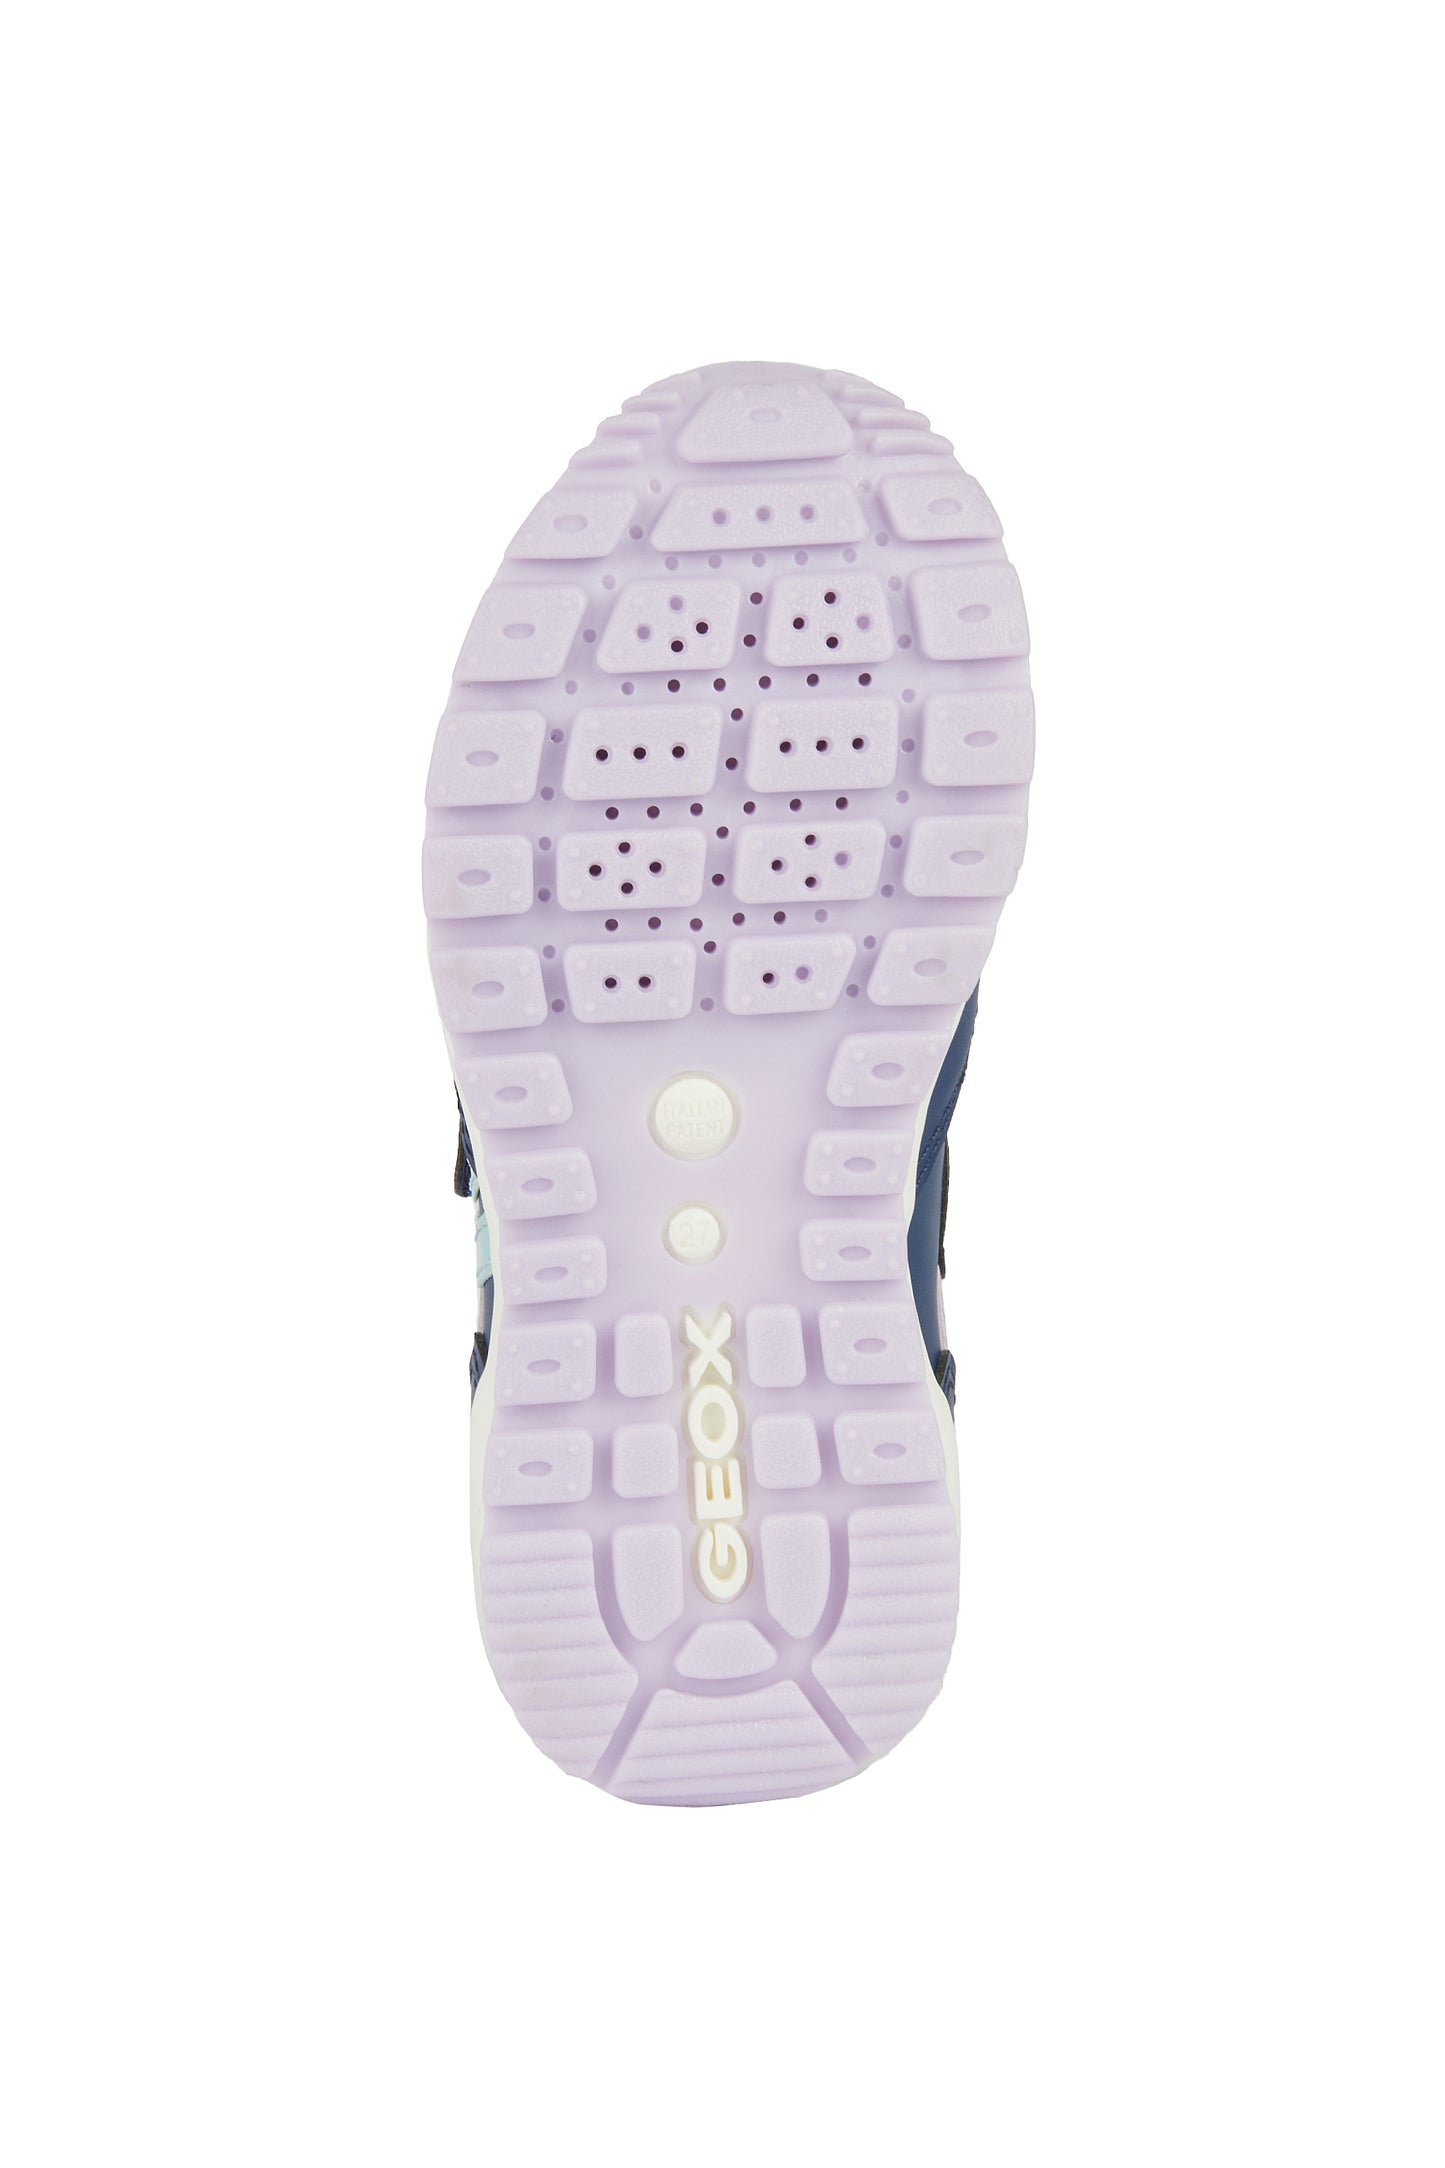 Pavel Trainer in Navy/Lilac